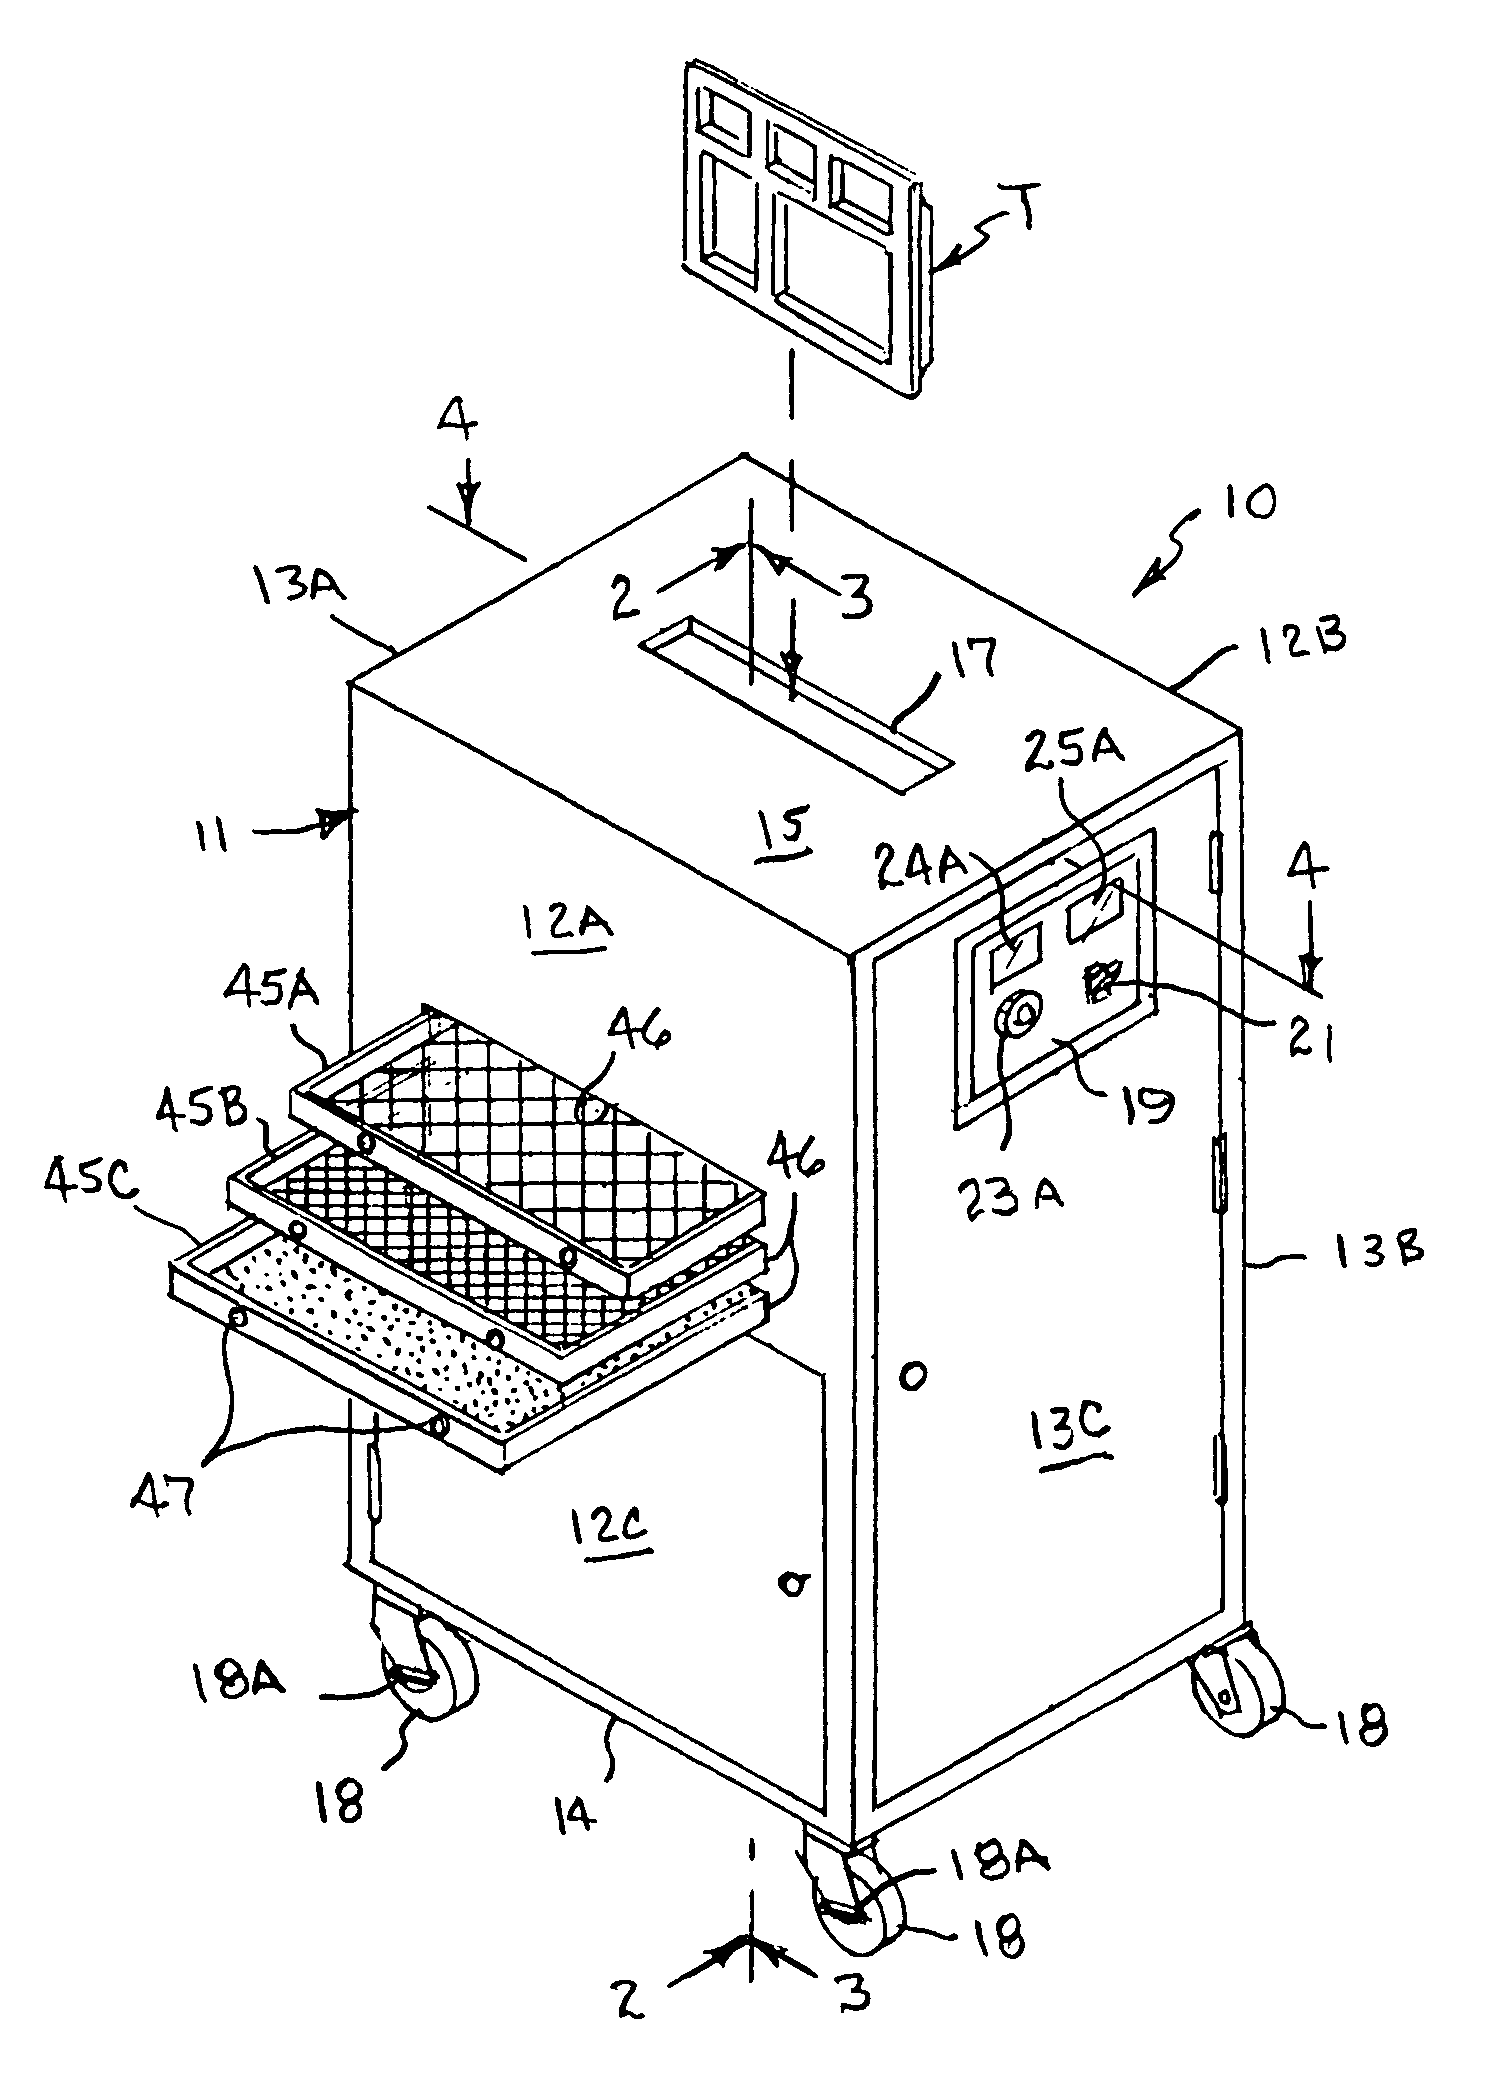 Portable food tray pre-wash and water recycling apparatus